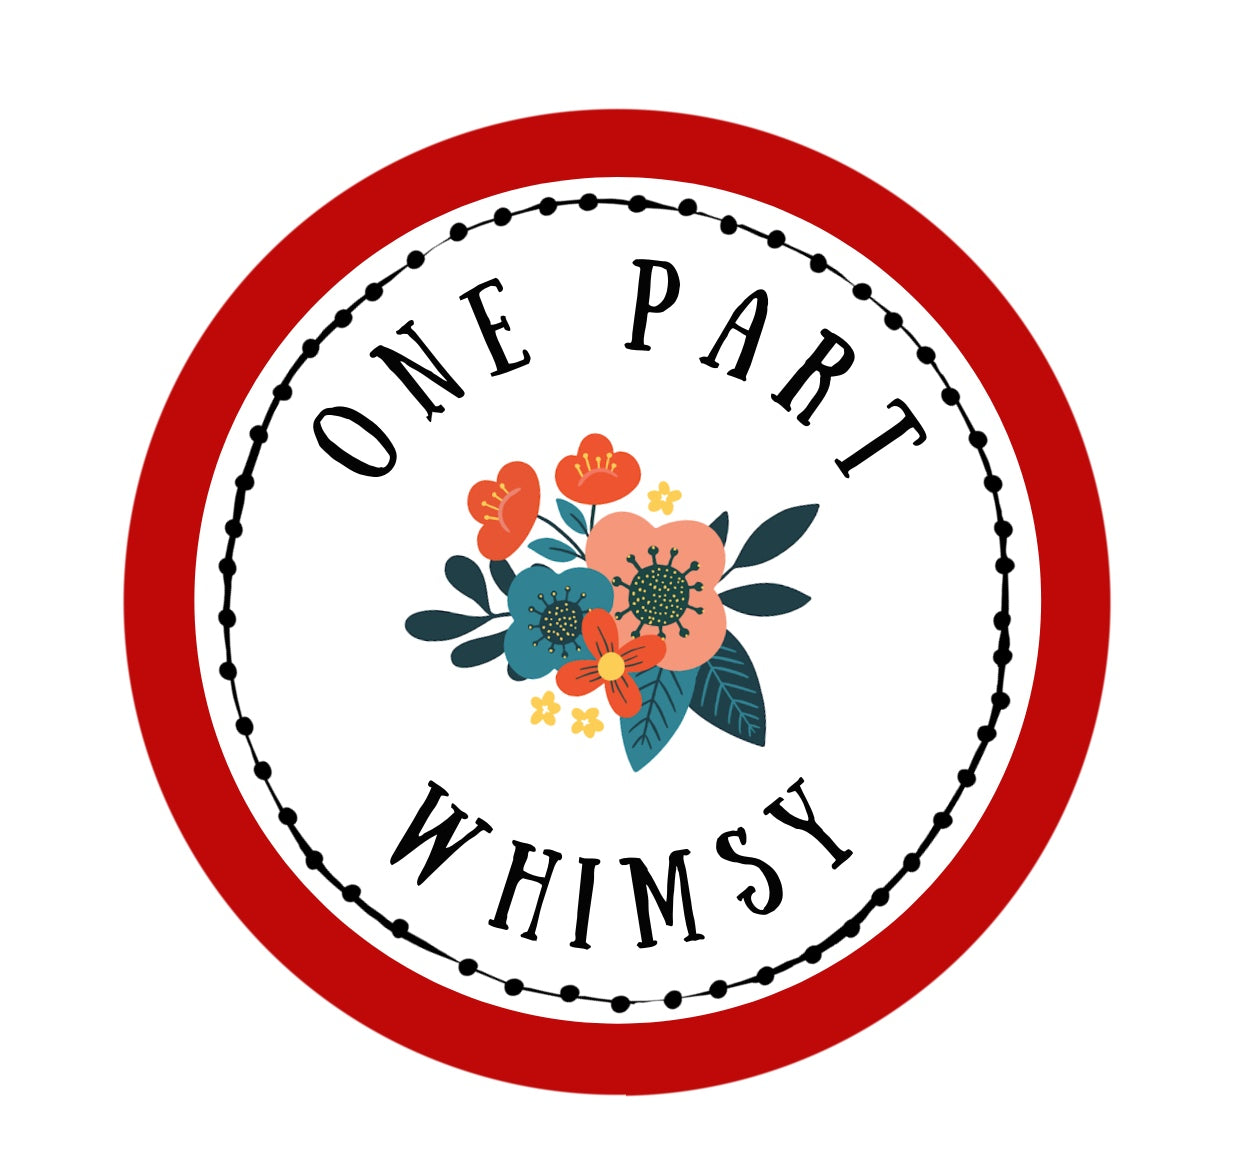 One Part Whimsy Gift Card